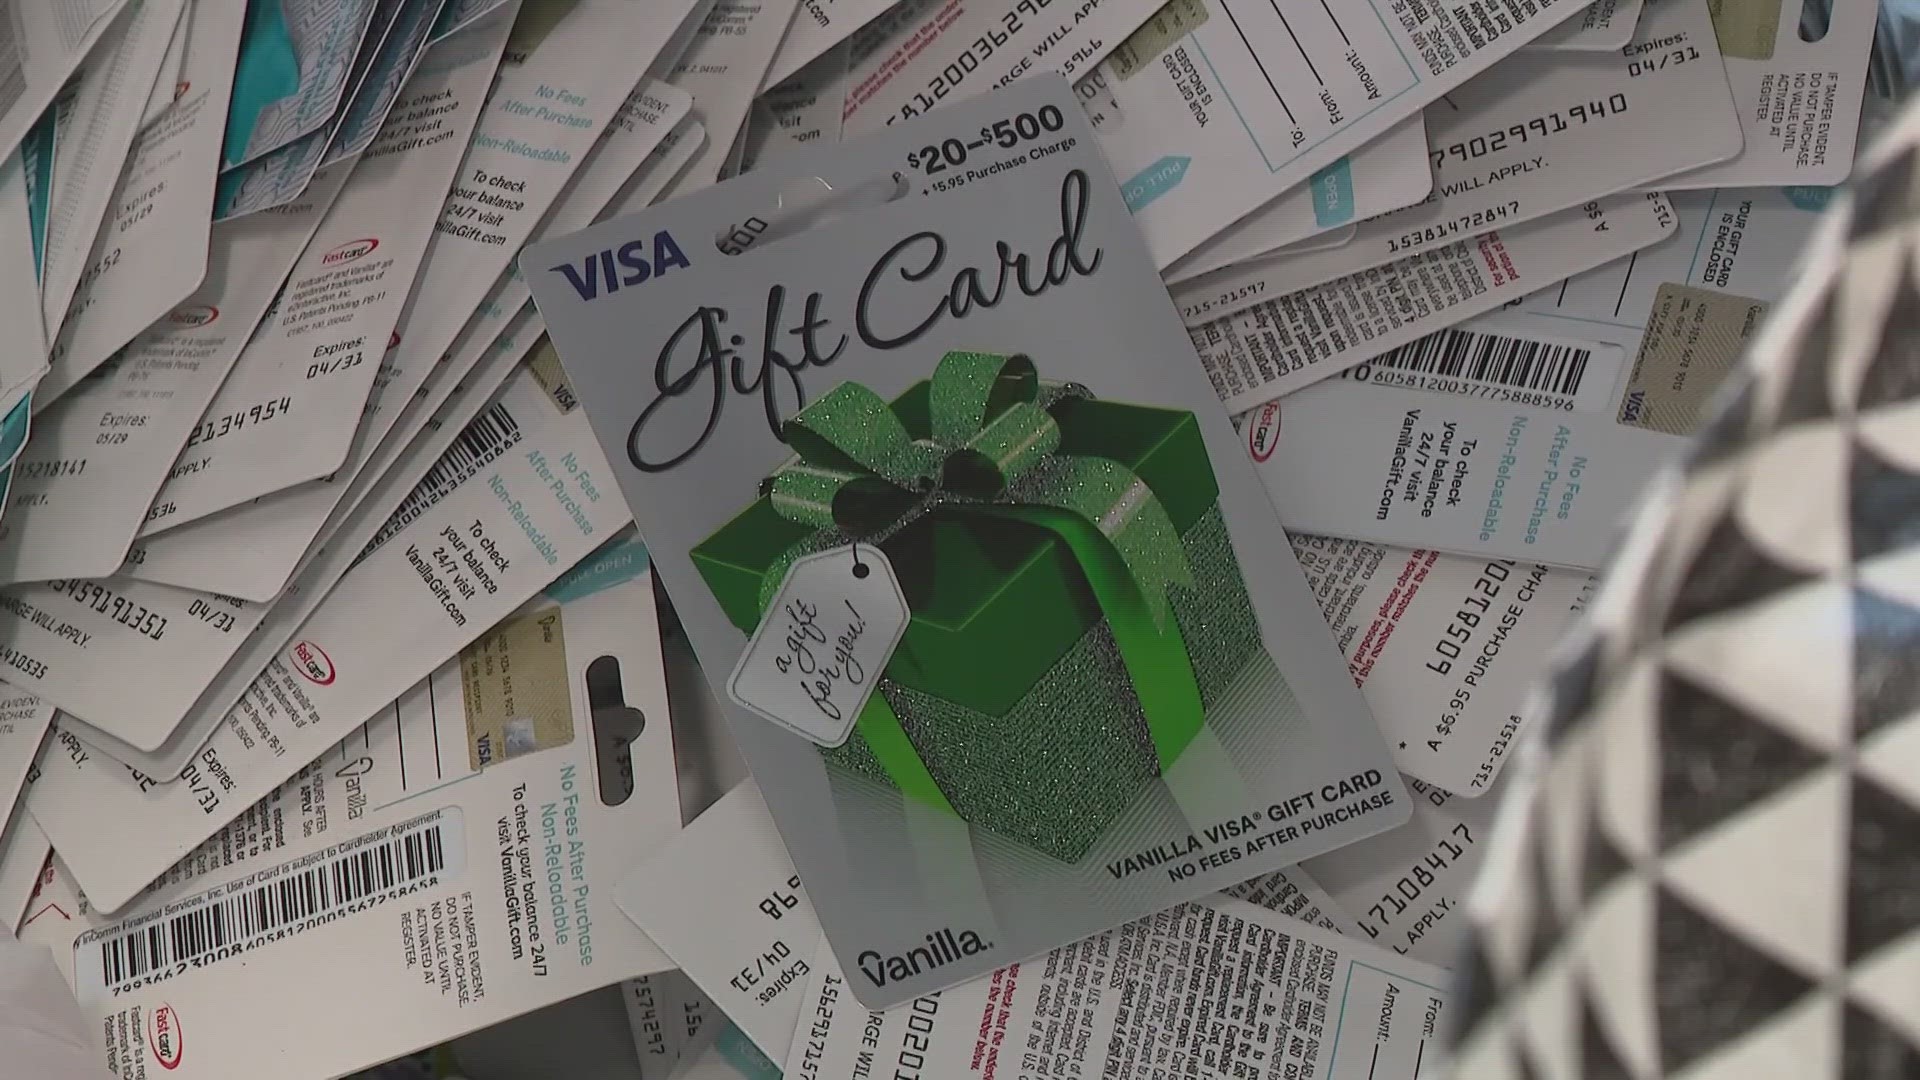 Worthington Police Detective Elizabeth Babb explained how thieves are stealing gift card information and what consumers can do to protect themselves from theft.